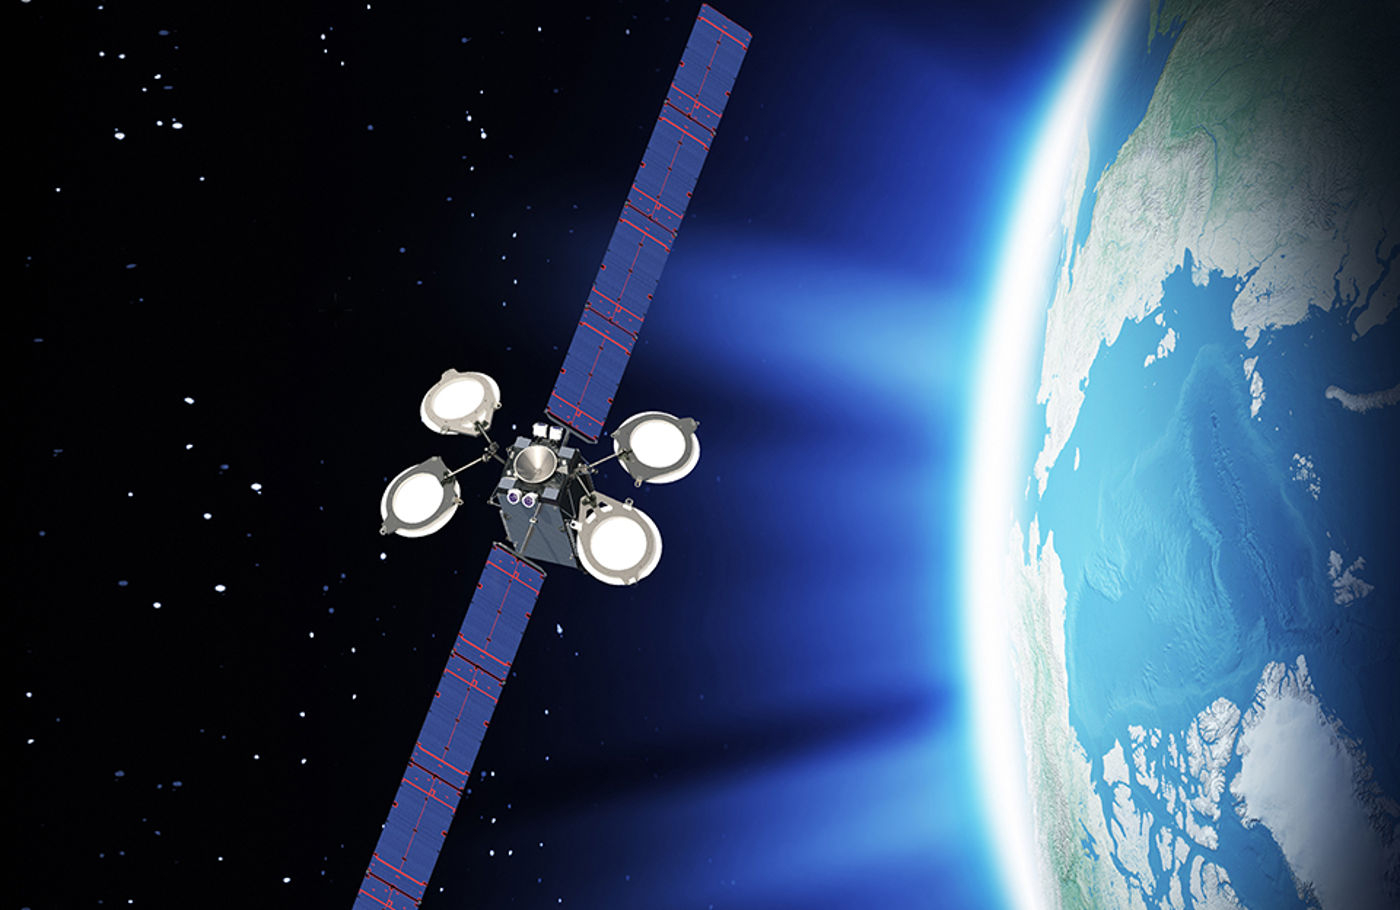 Boeing is going to produce 3D printed modular satellites